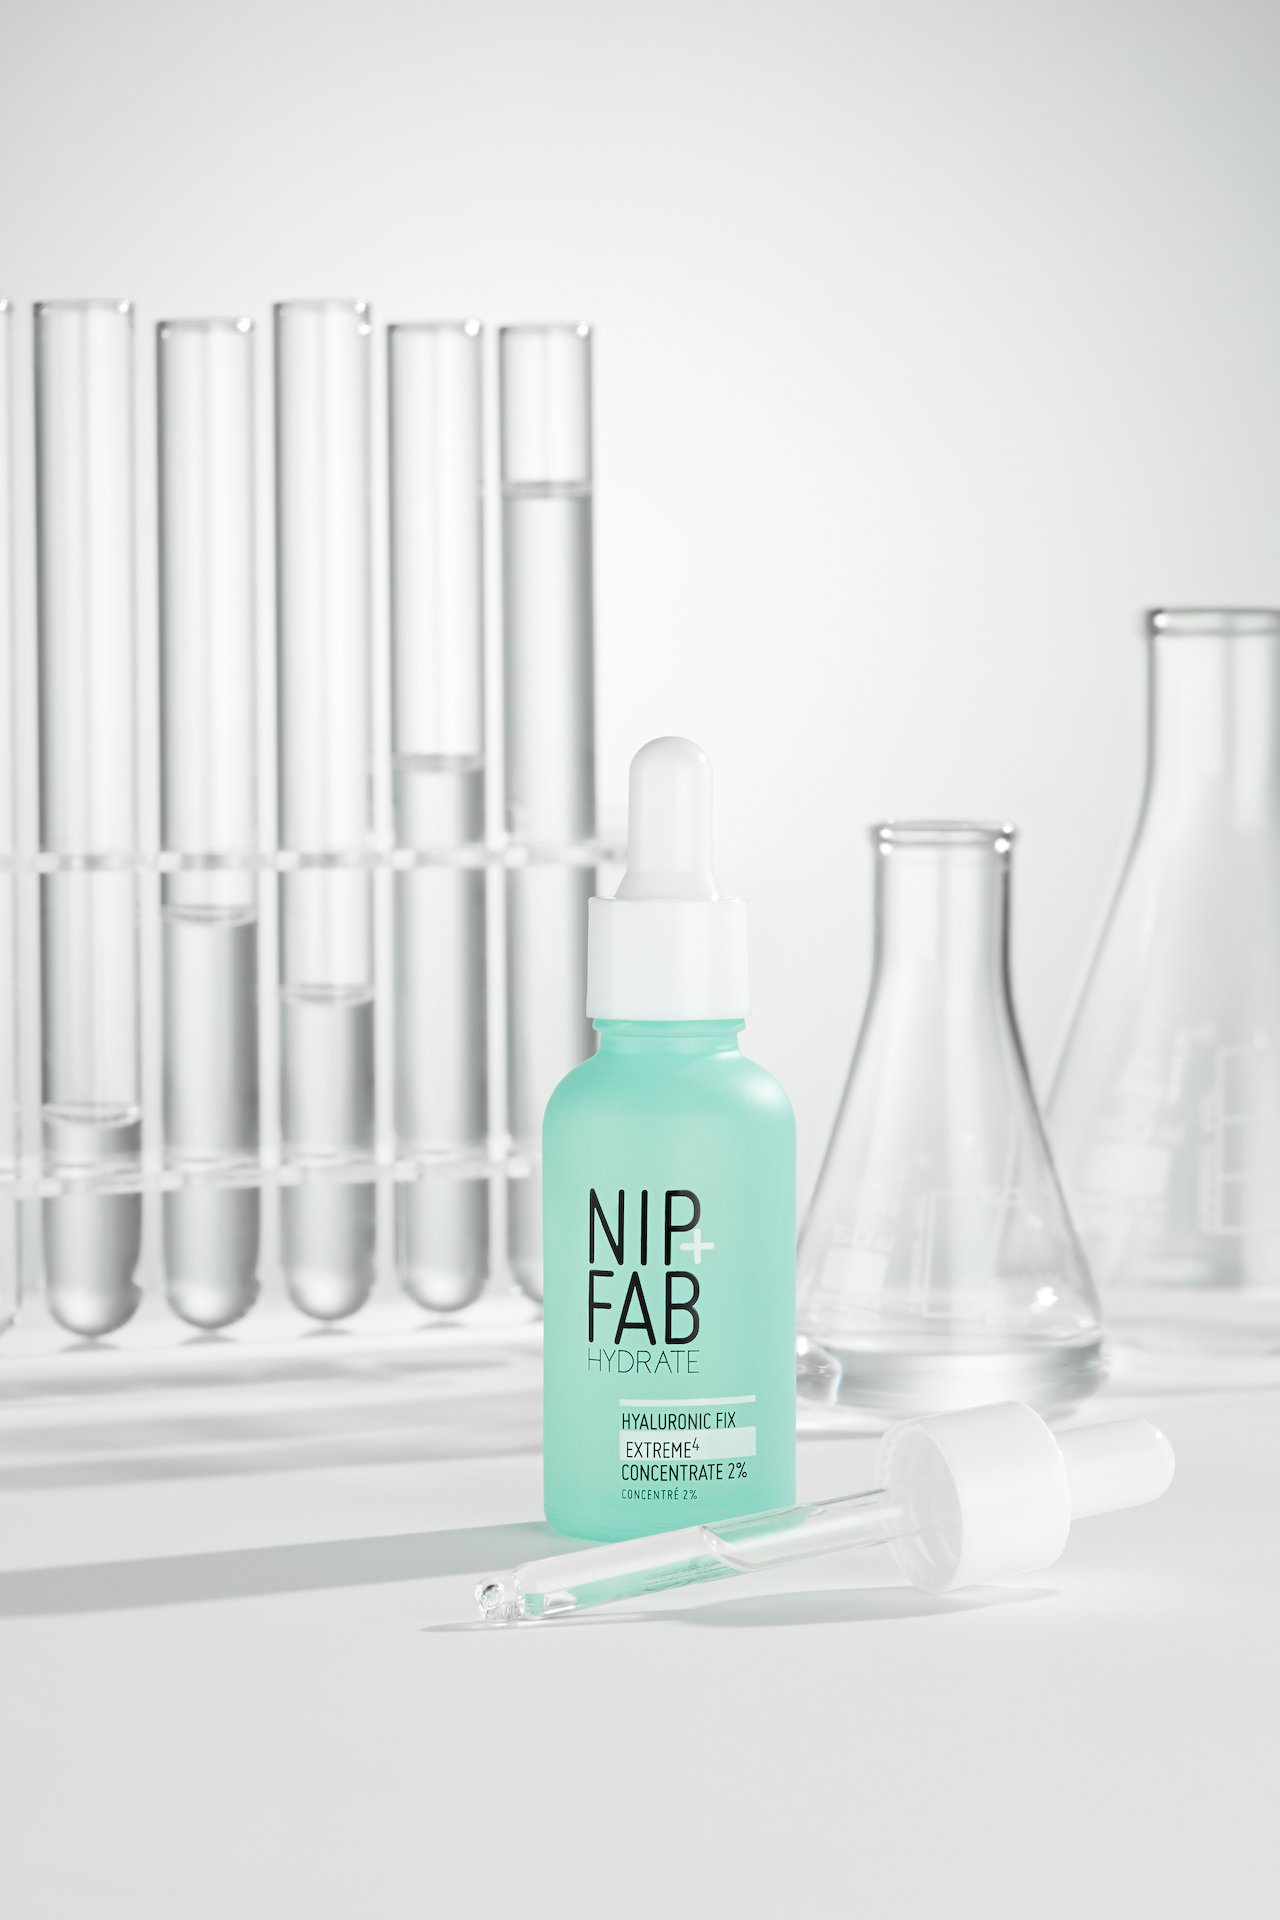 NIP+FAB Hyaluronic Fix Extreme4  2% Concentrate Extreme 30 ml